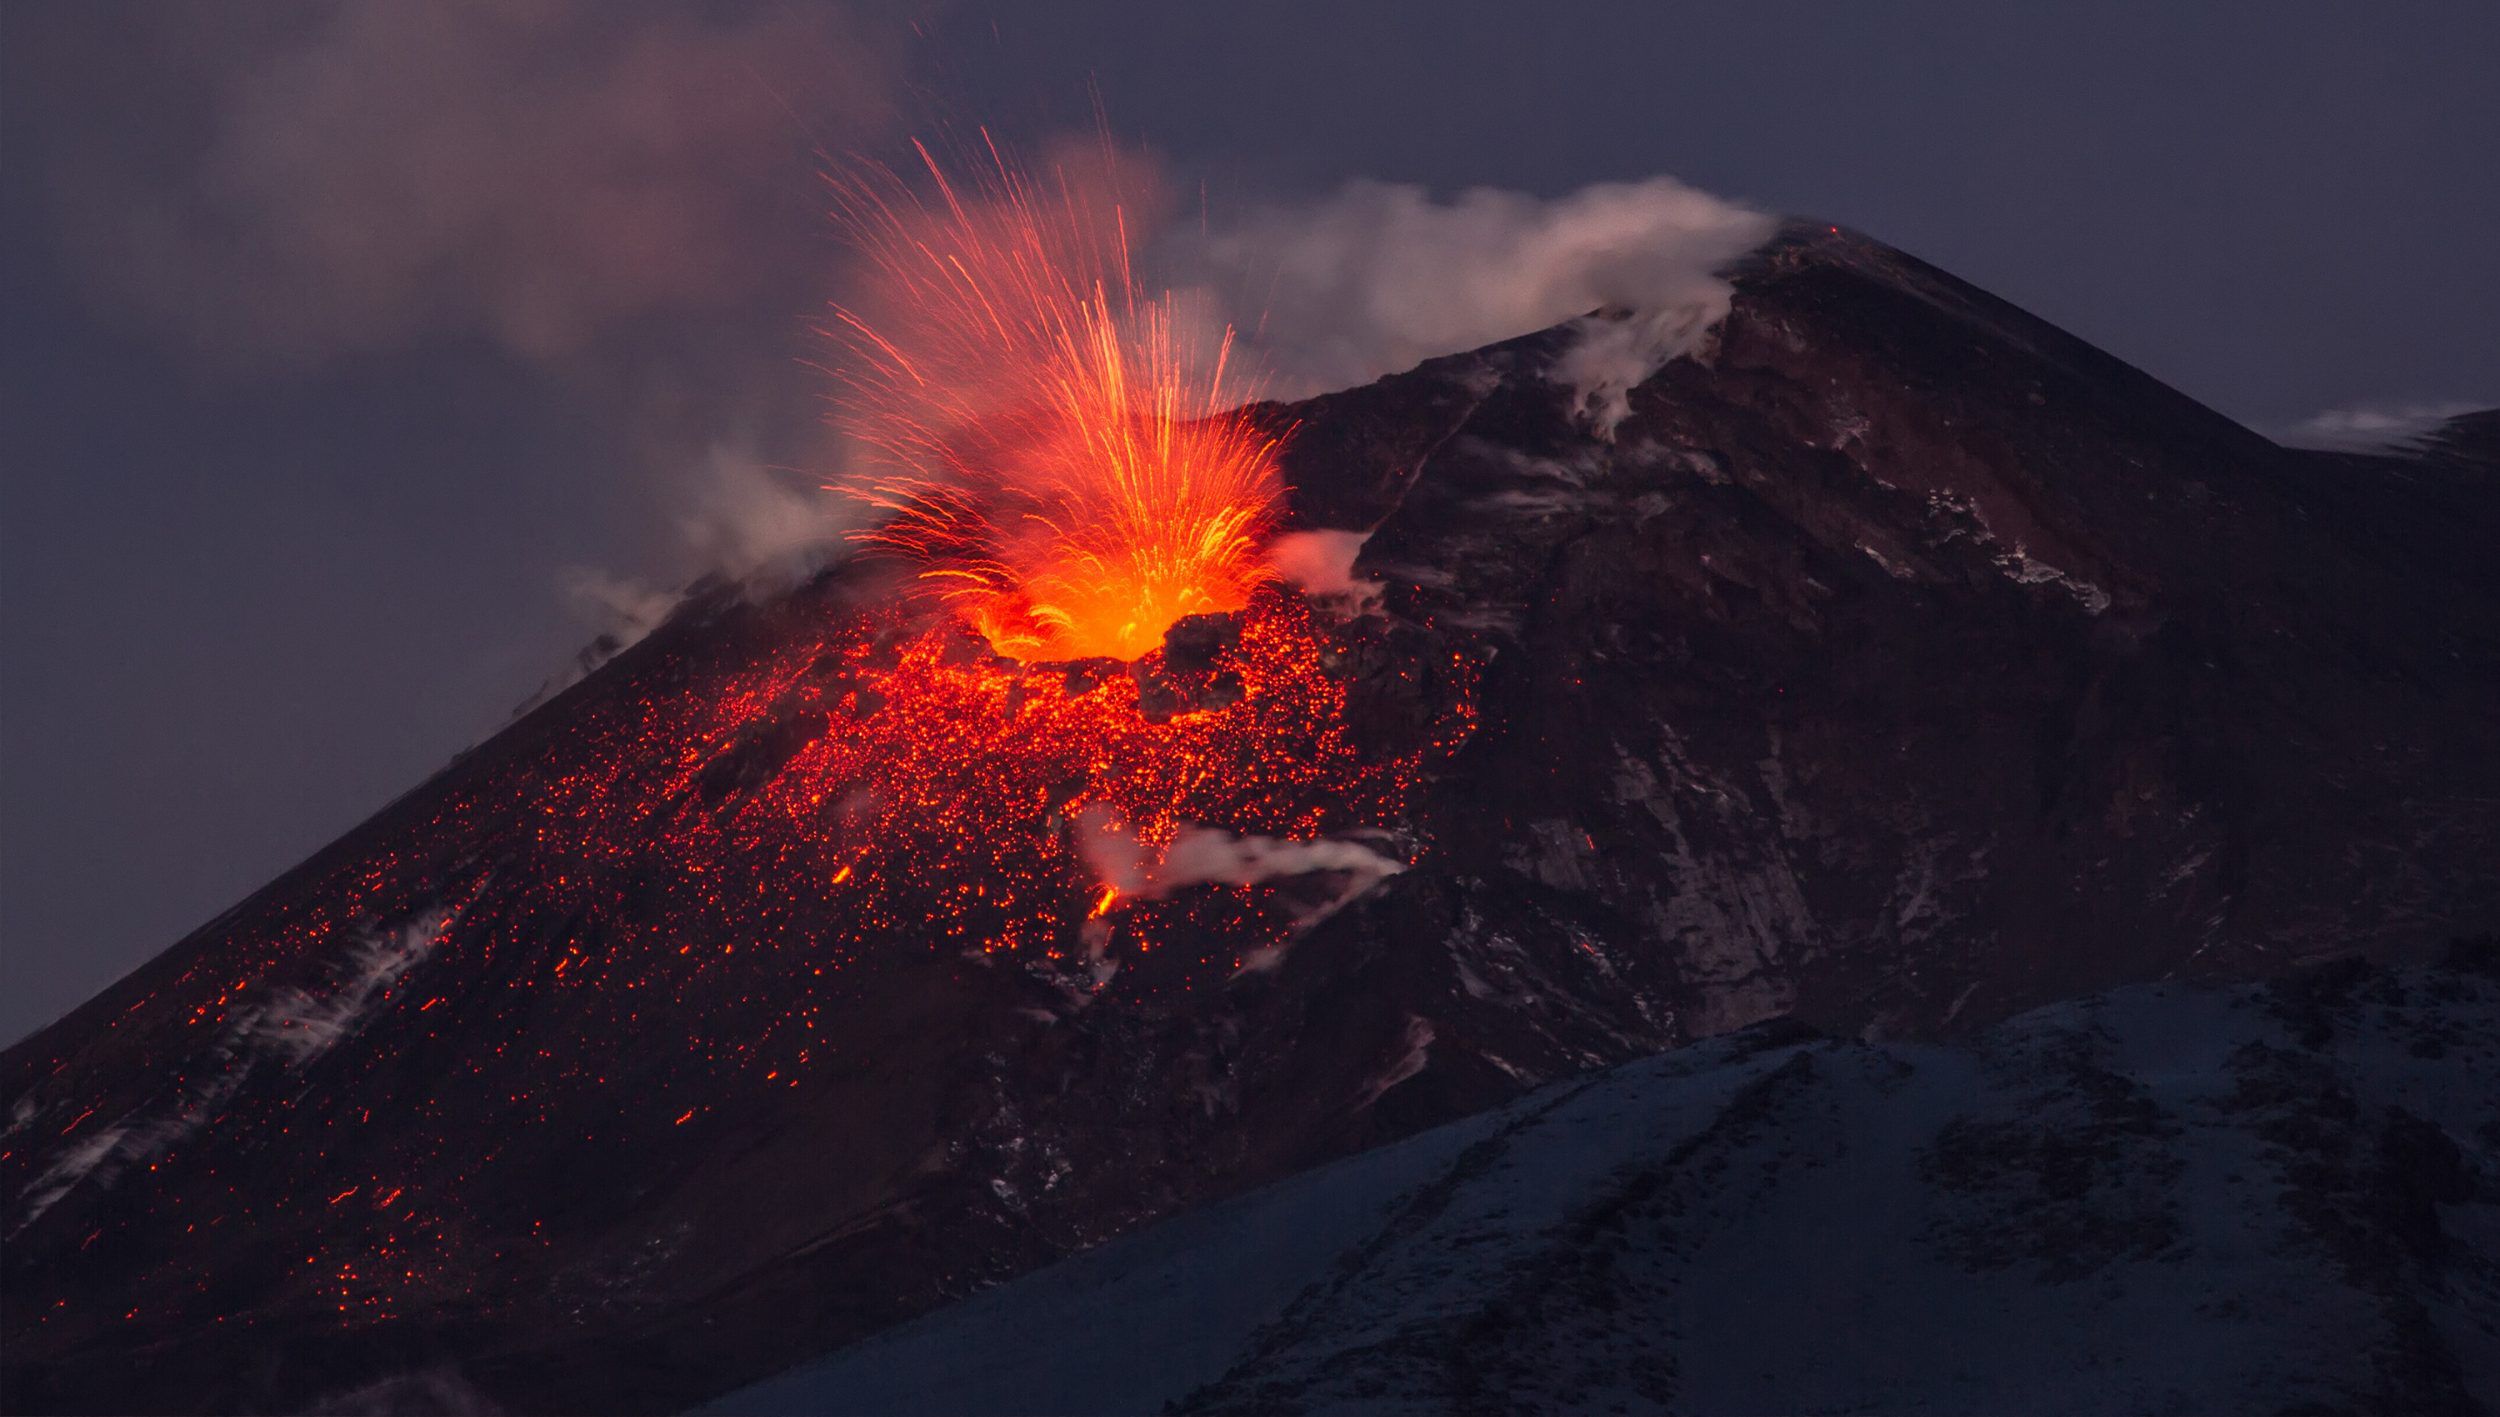 An erupting volcano - the miracle diamond creation